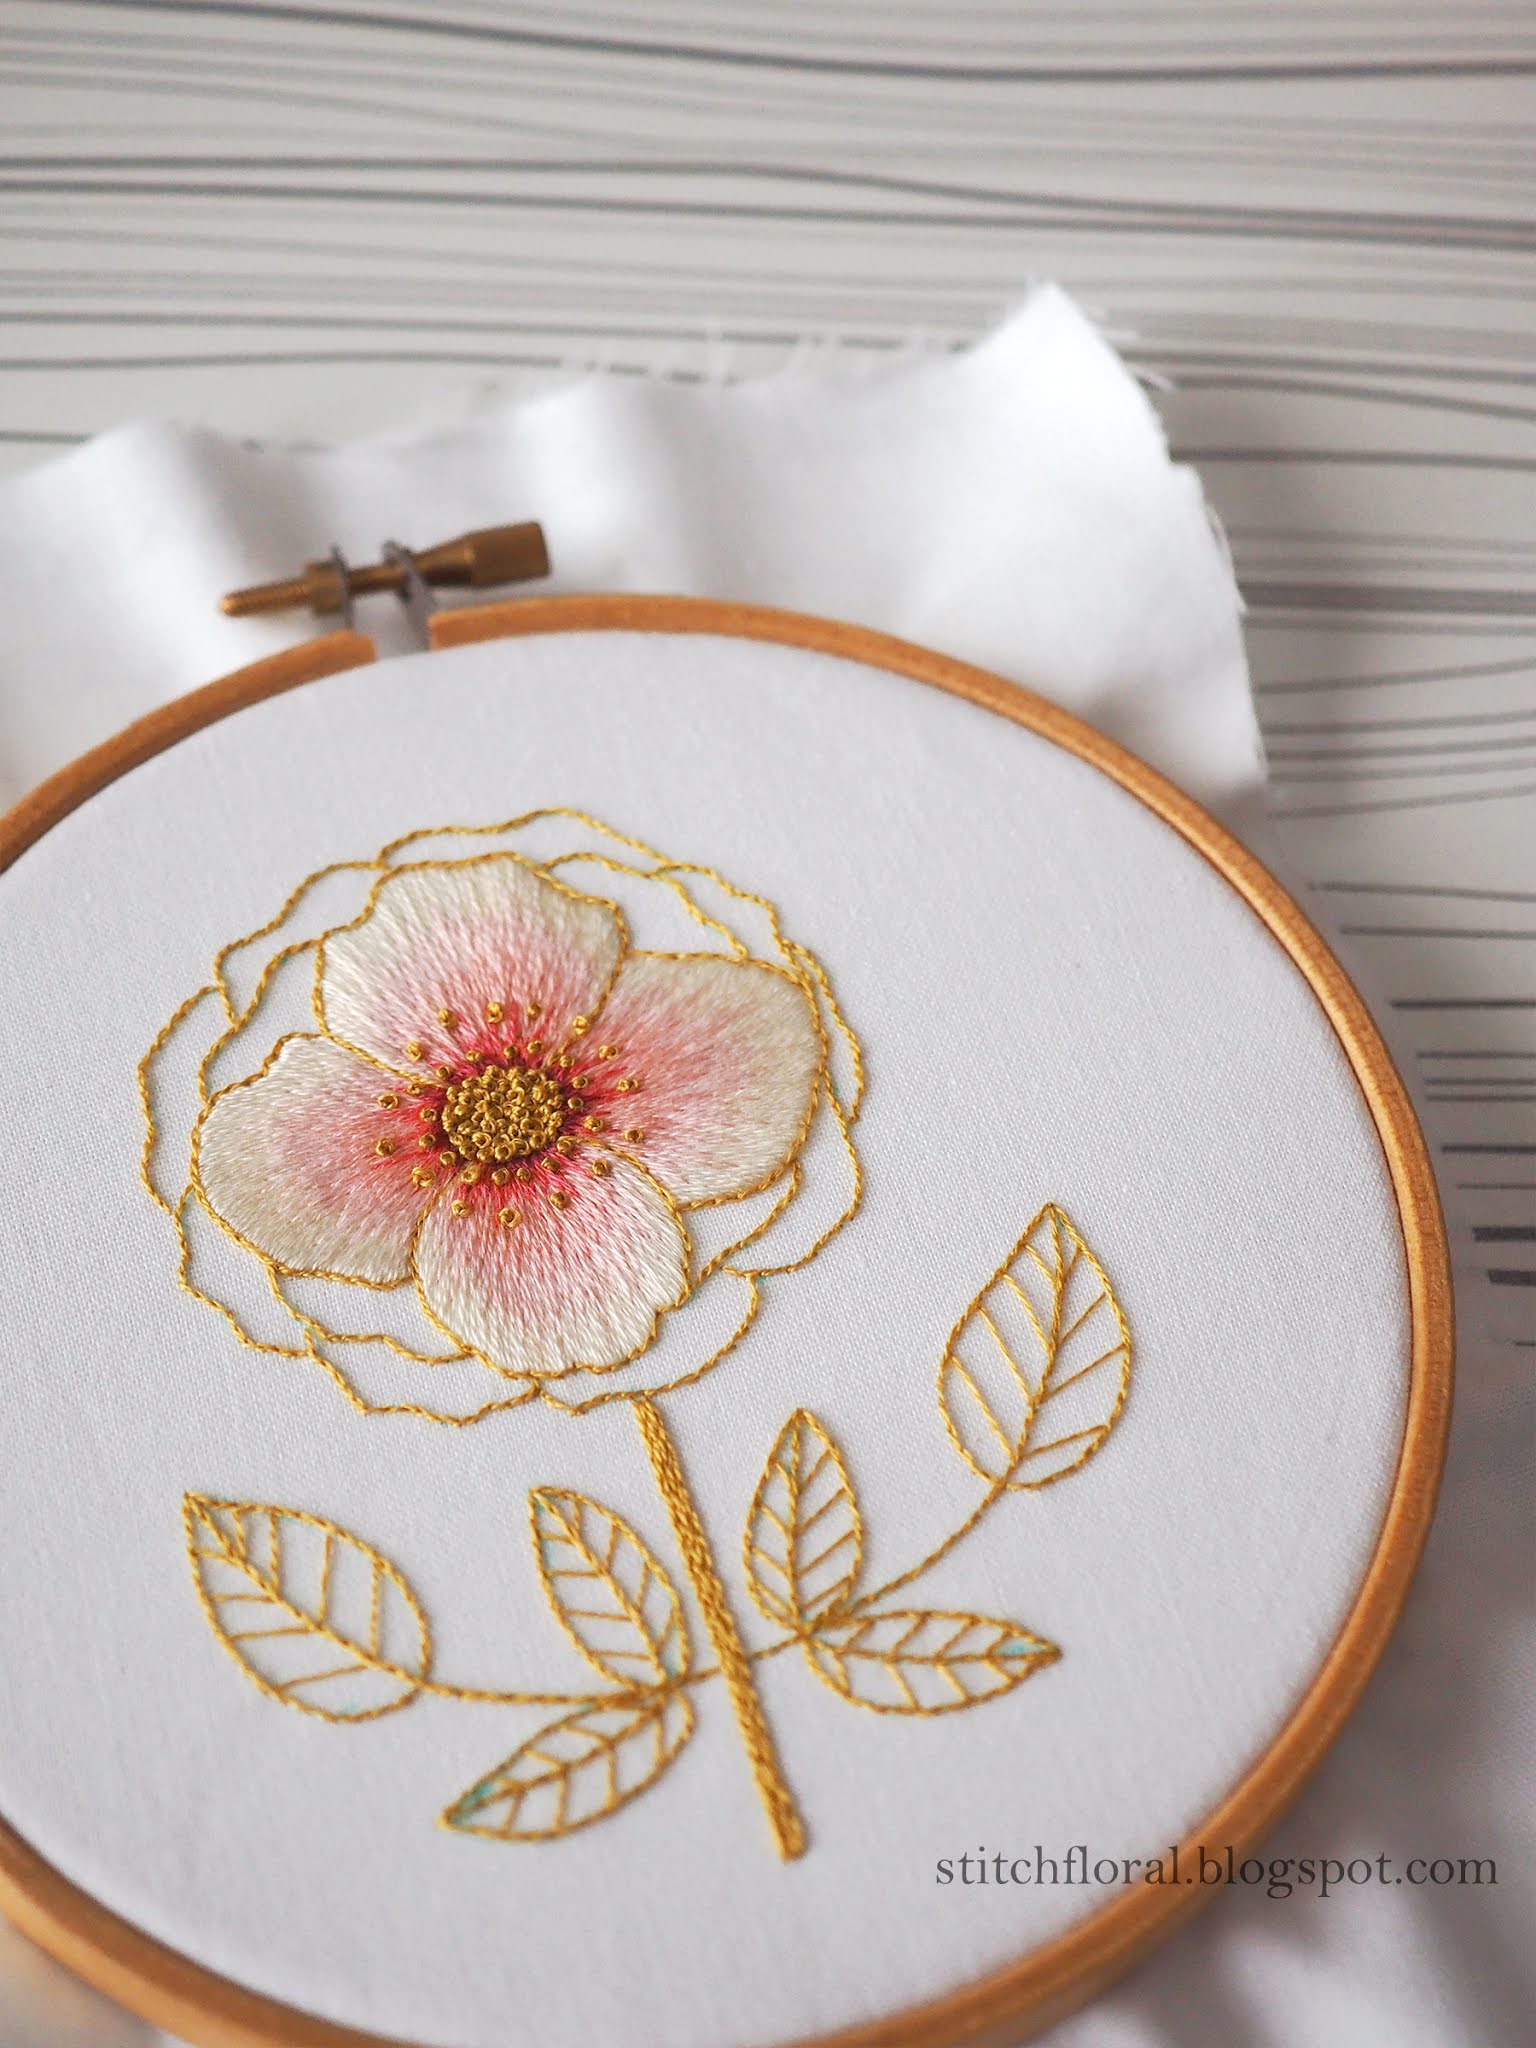 Embroidery Journal Update: June 2022! 